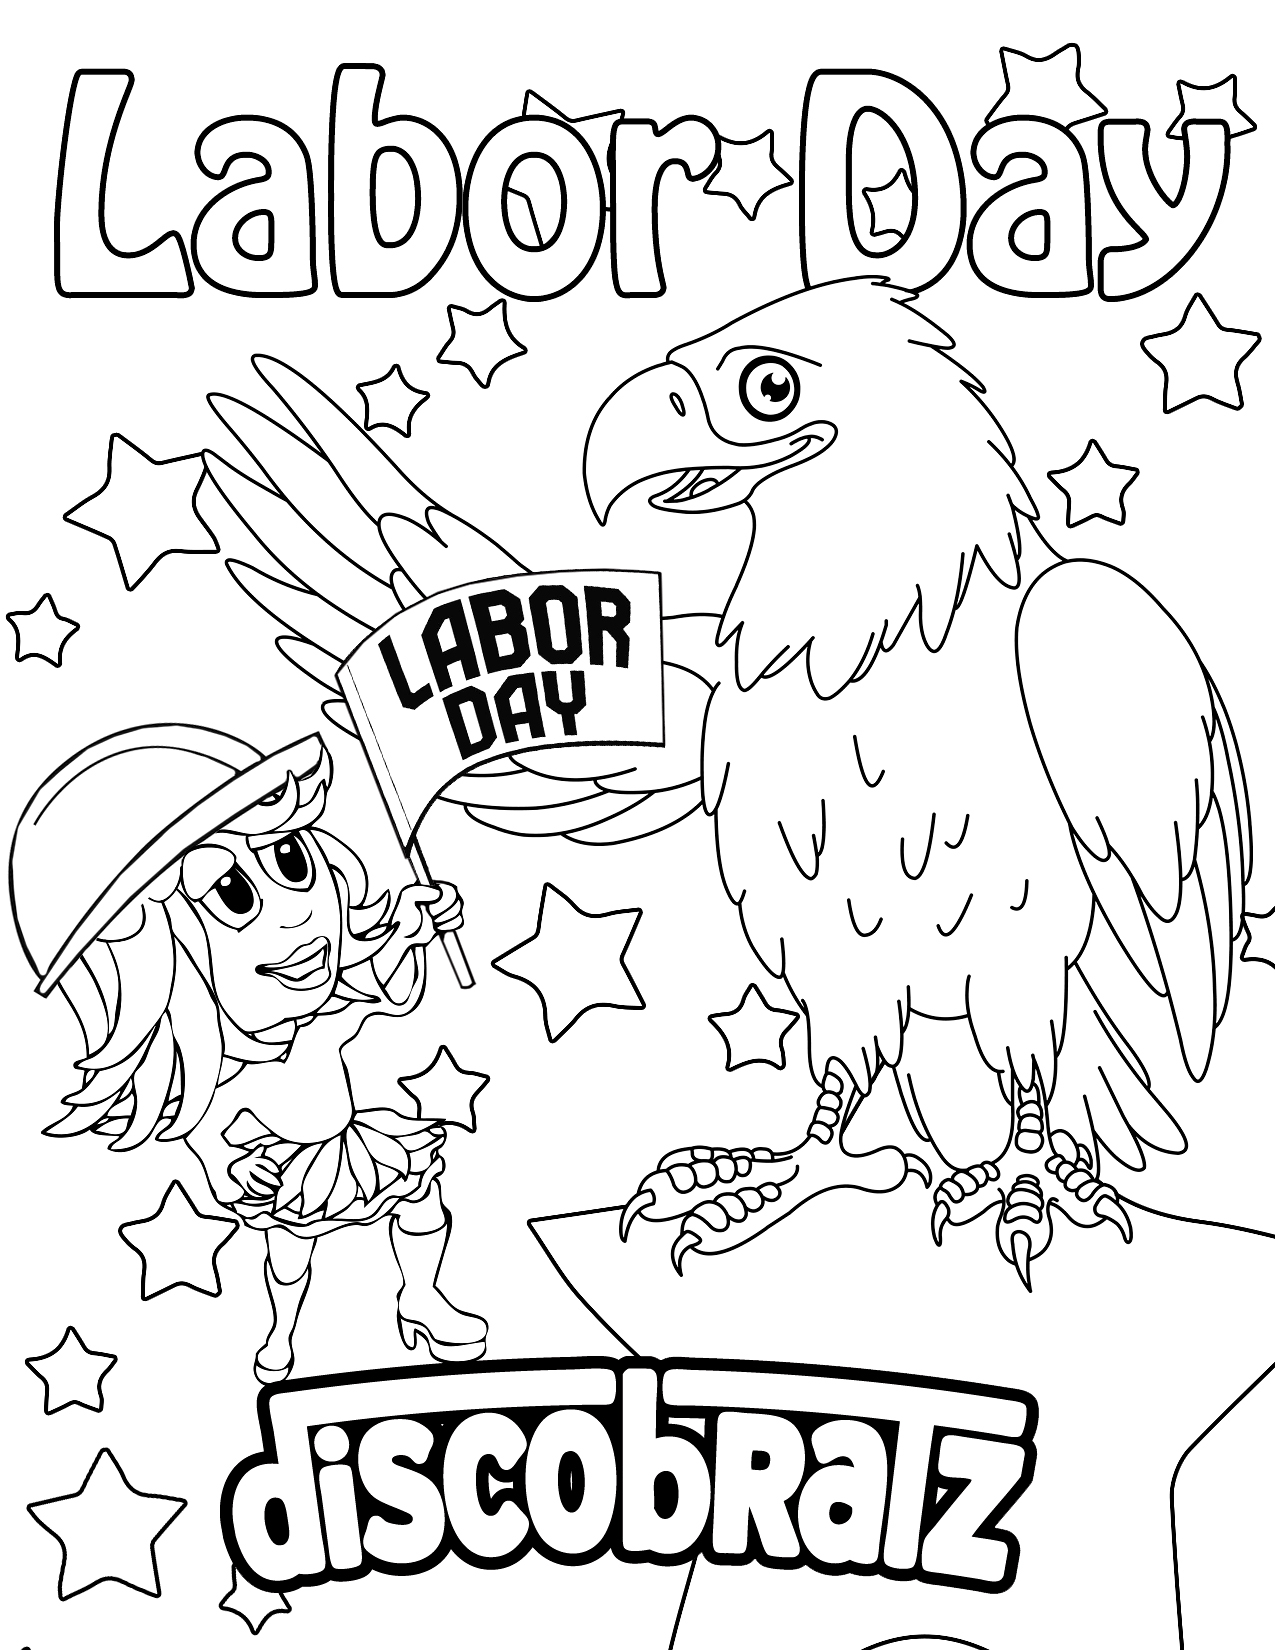 DiscoBratz Celebrates the Workers of the World with a Labor Day